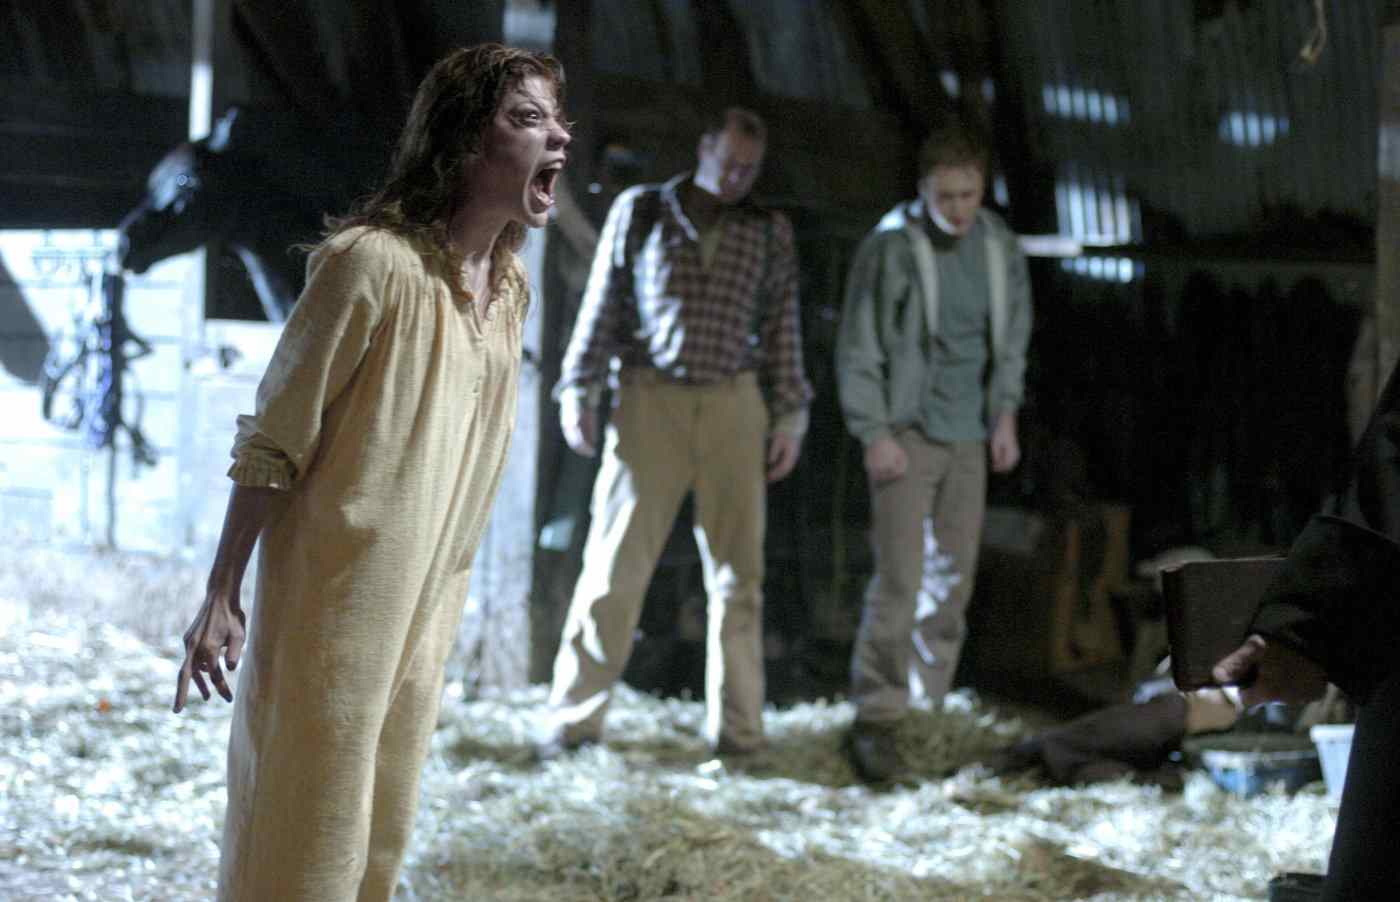 The Exorcism of Emily Rose directed by Scott Derrickson.